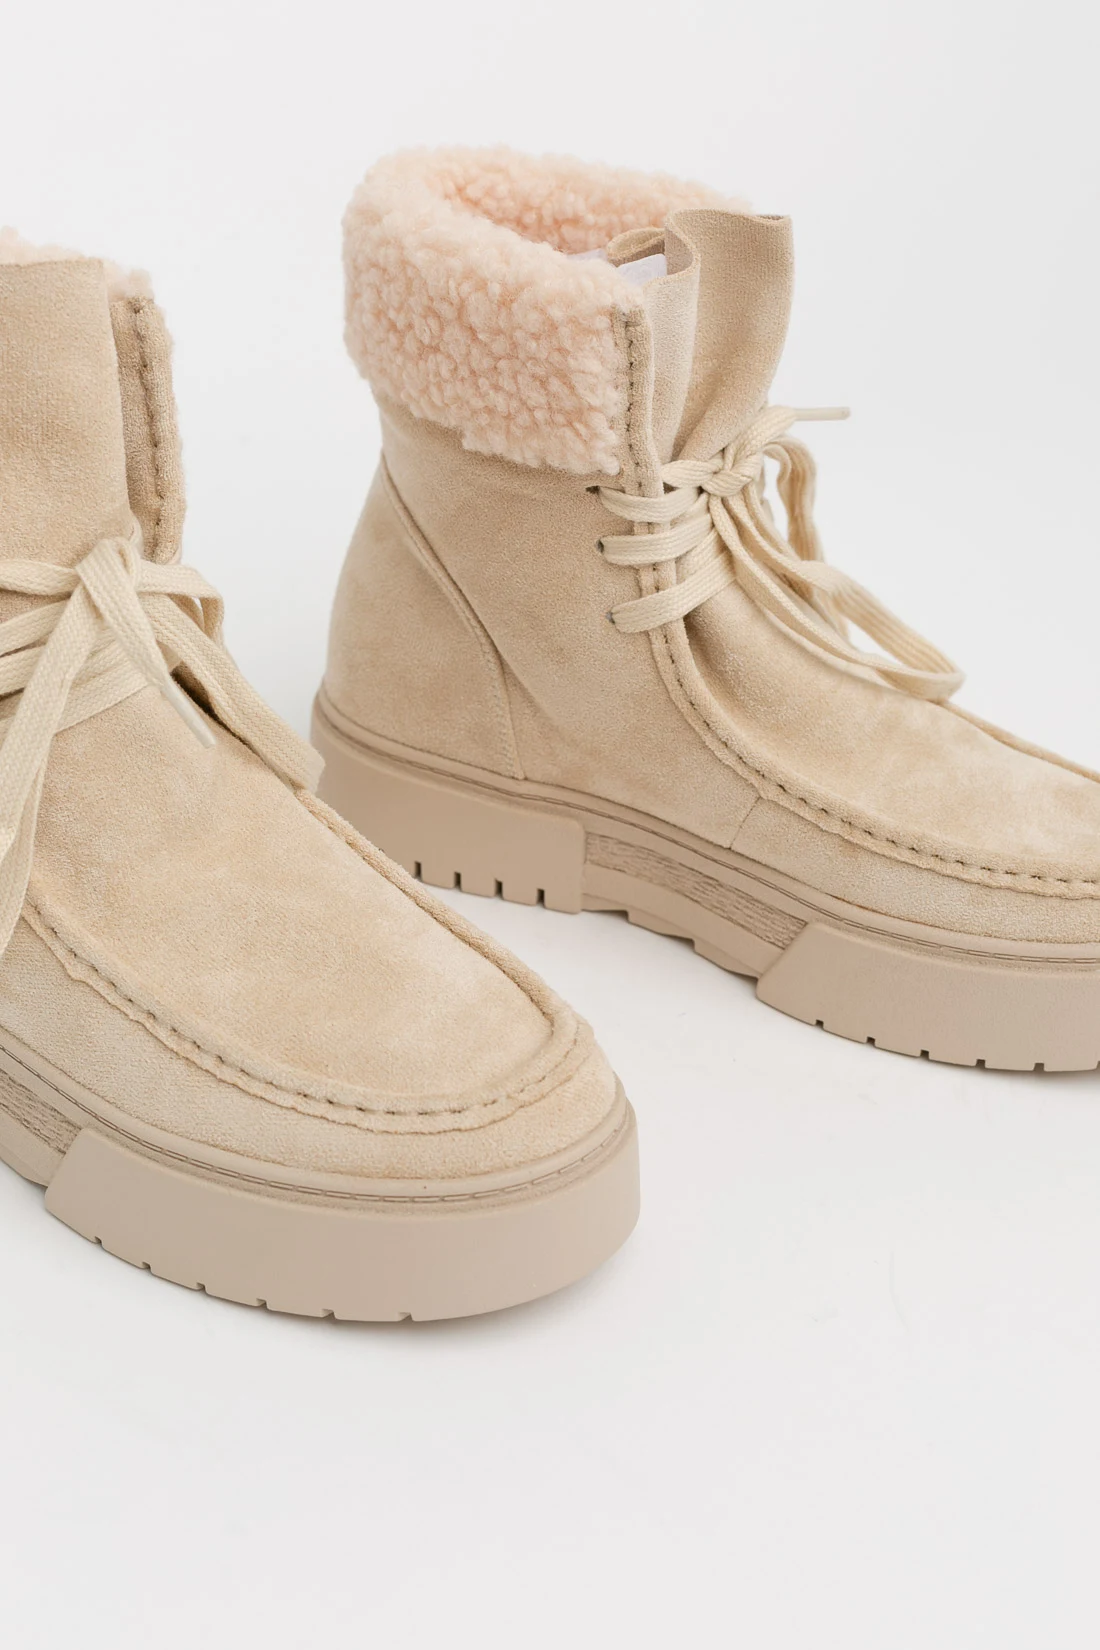 COVET LOW BOOT - BEGE